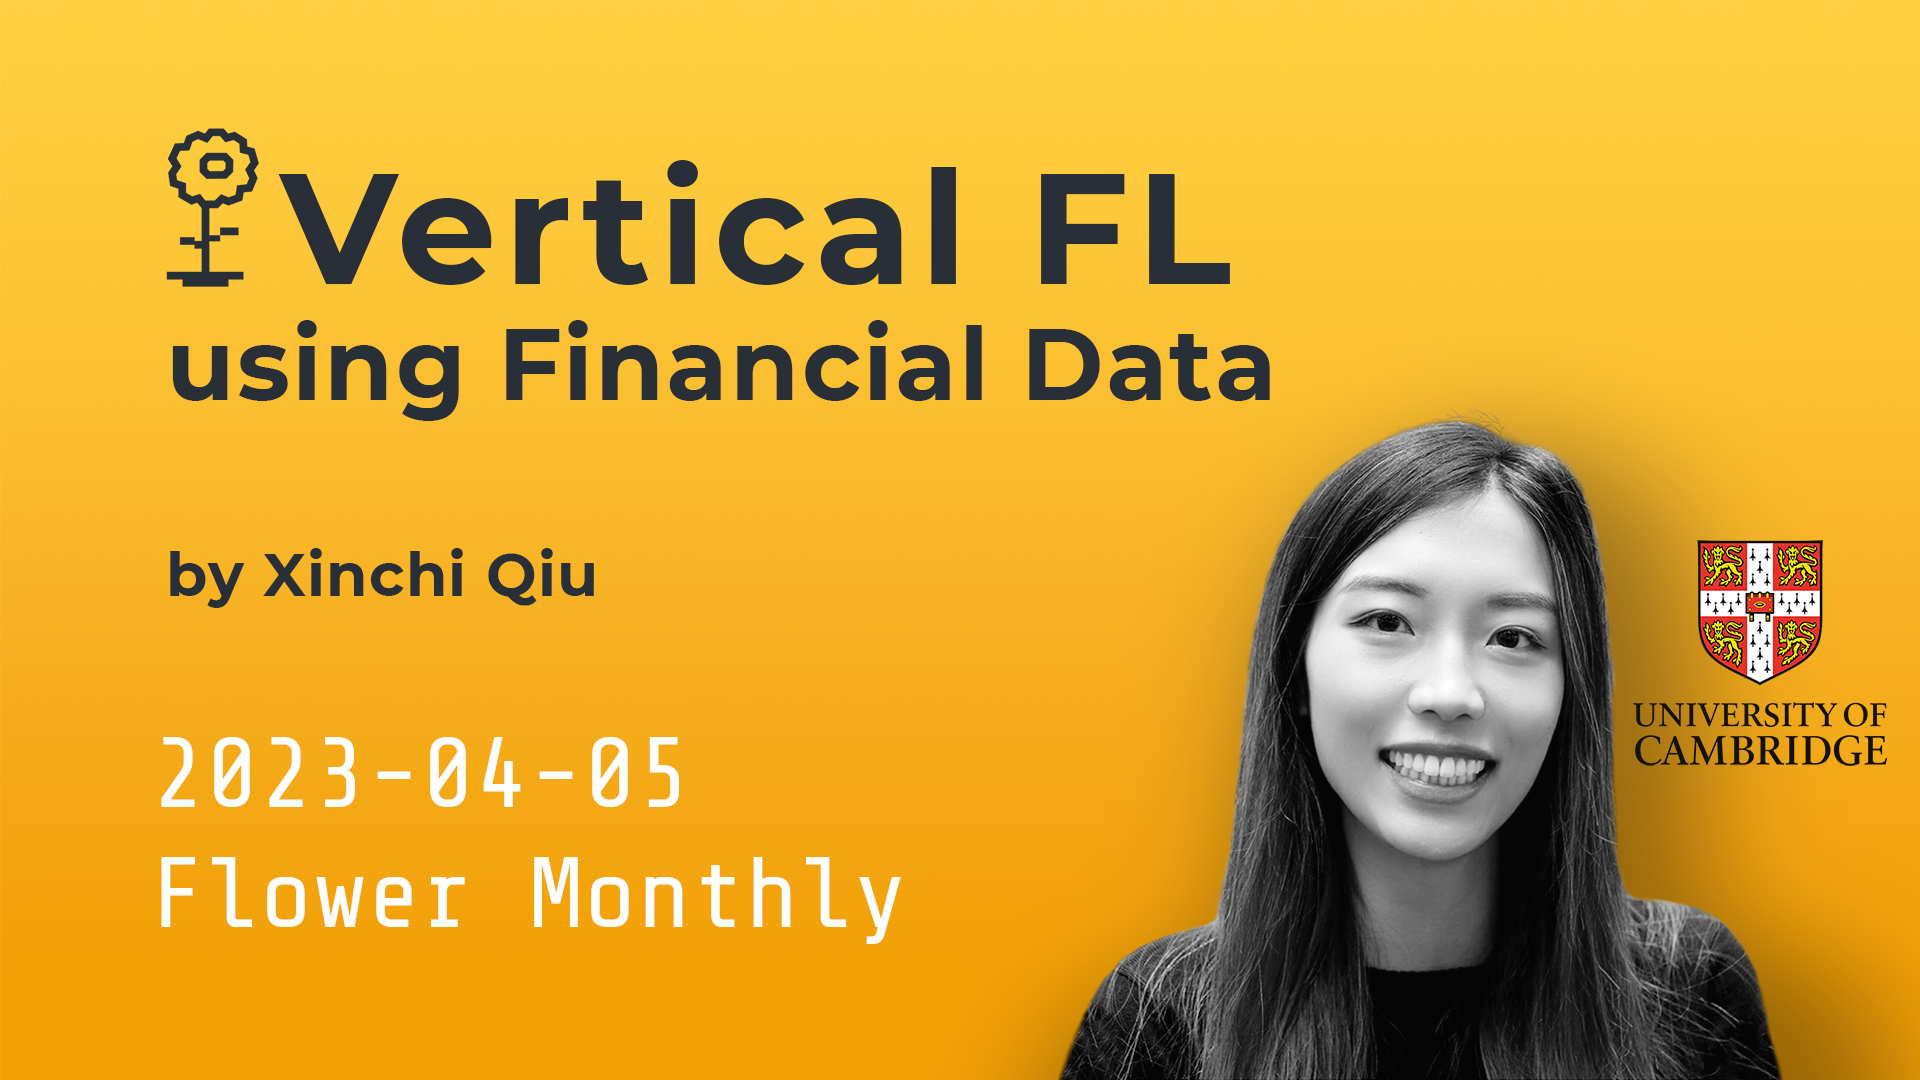 Vertical Federated Learning using Financial Data